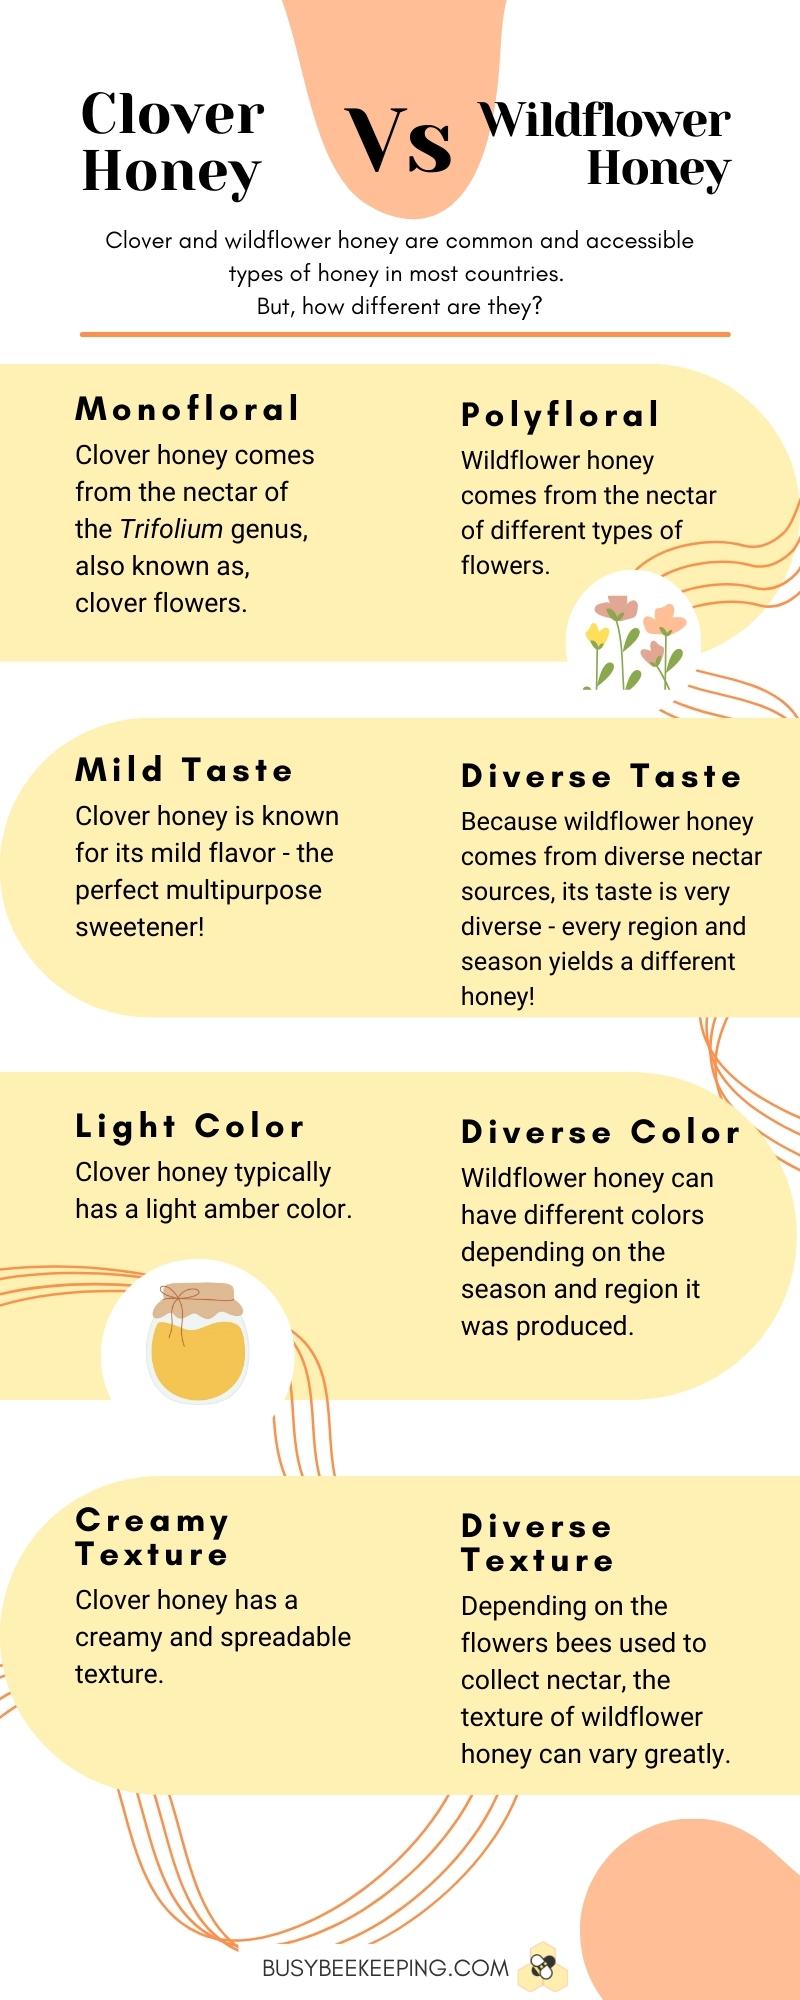 Infographic outlining the main differences between clover and wildflower honey